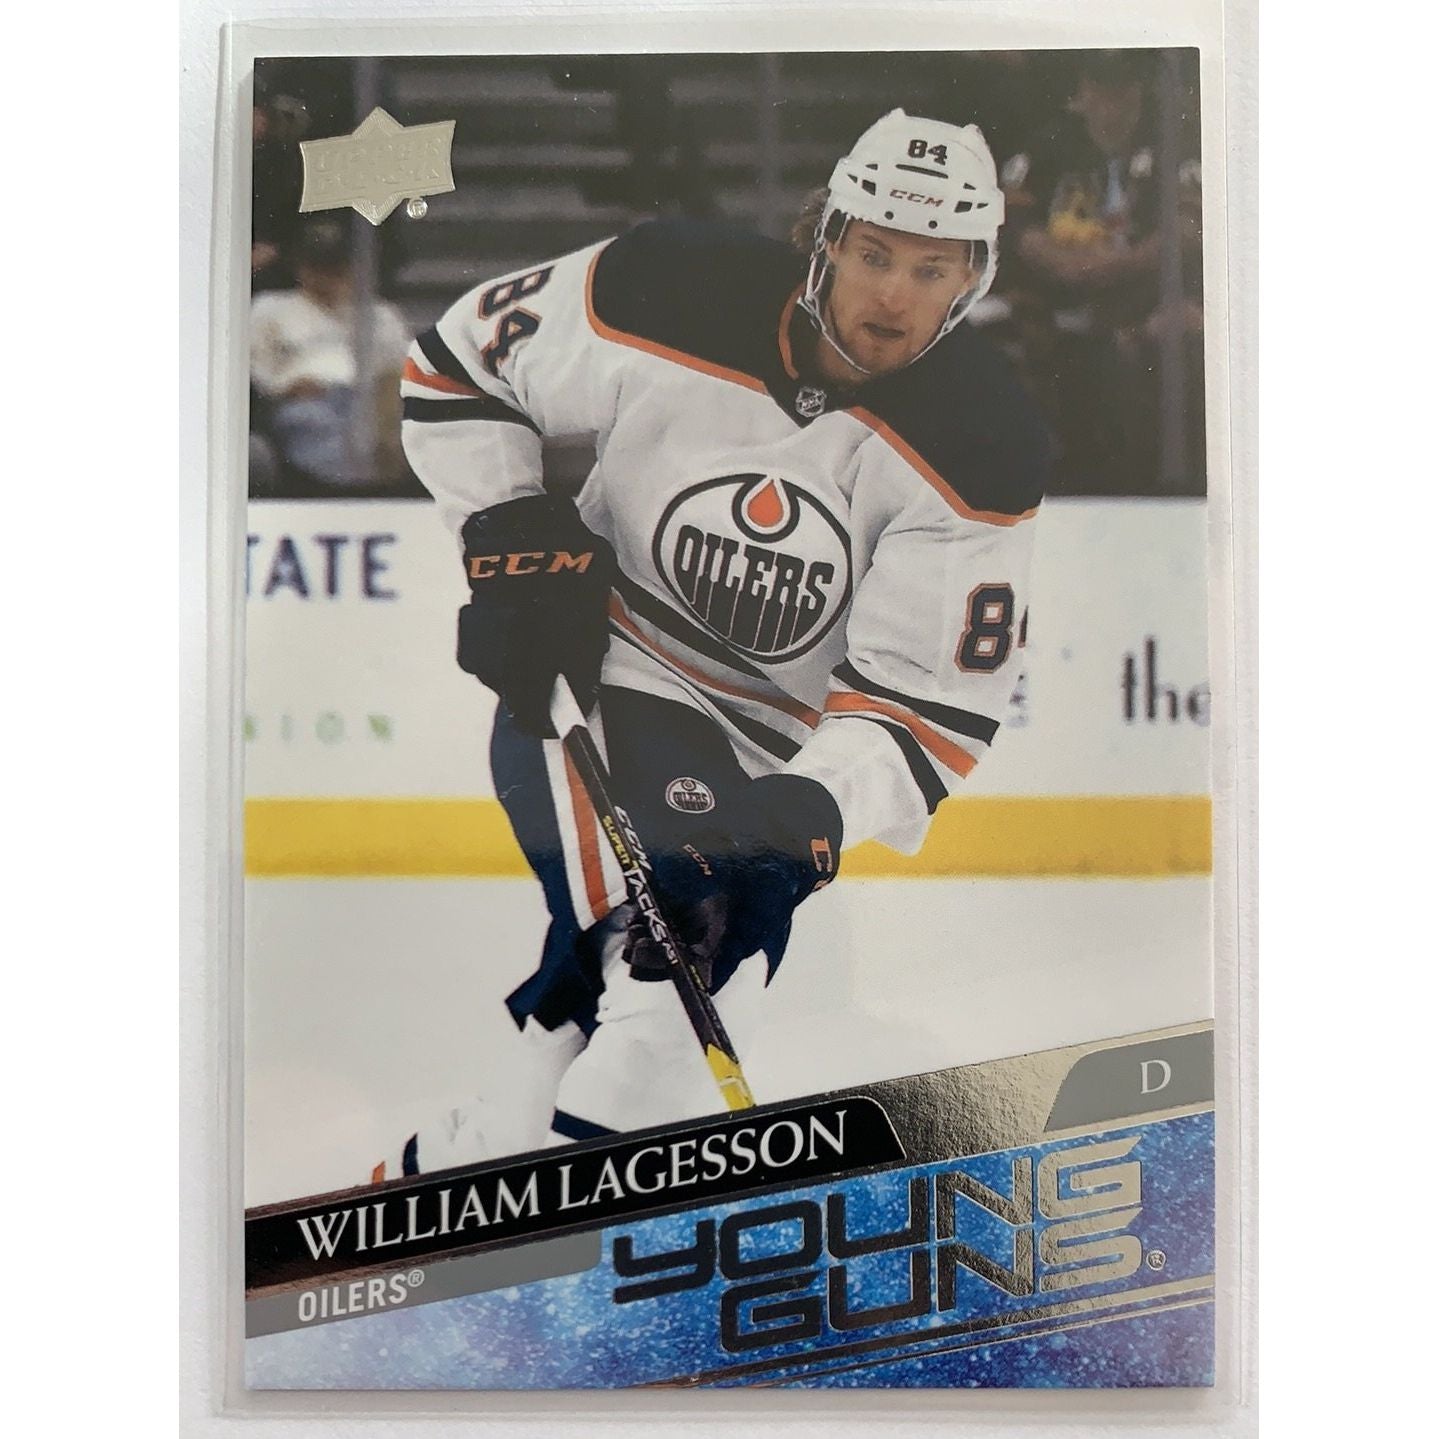  2020-21 Upper Deck Series 2 William Lagesson Young Guns  Local Legends Cards & Collectibles